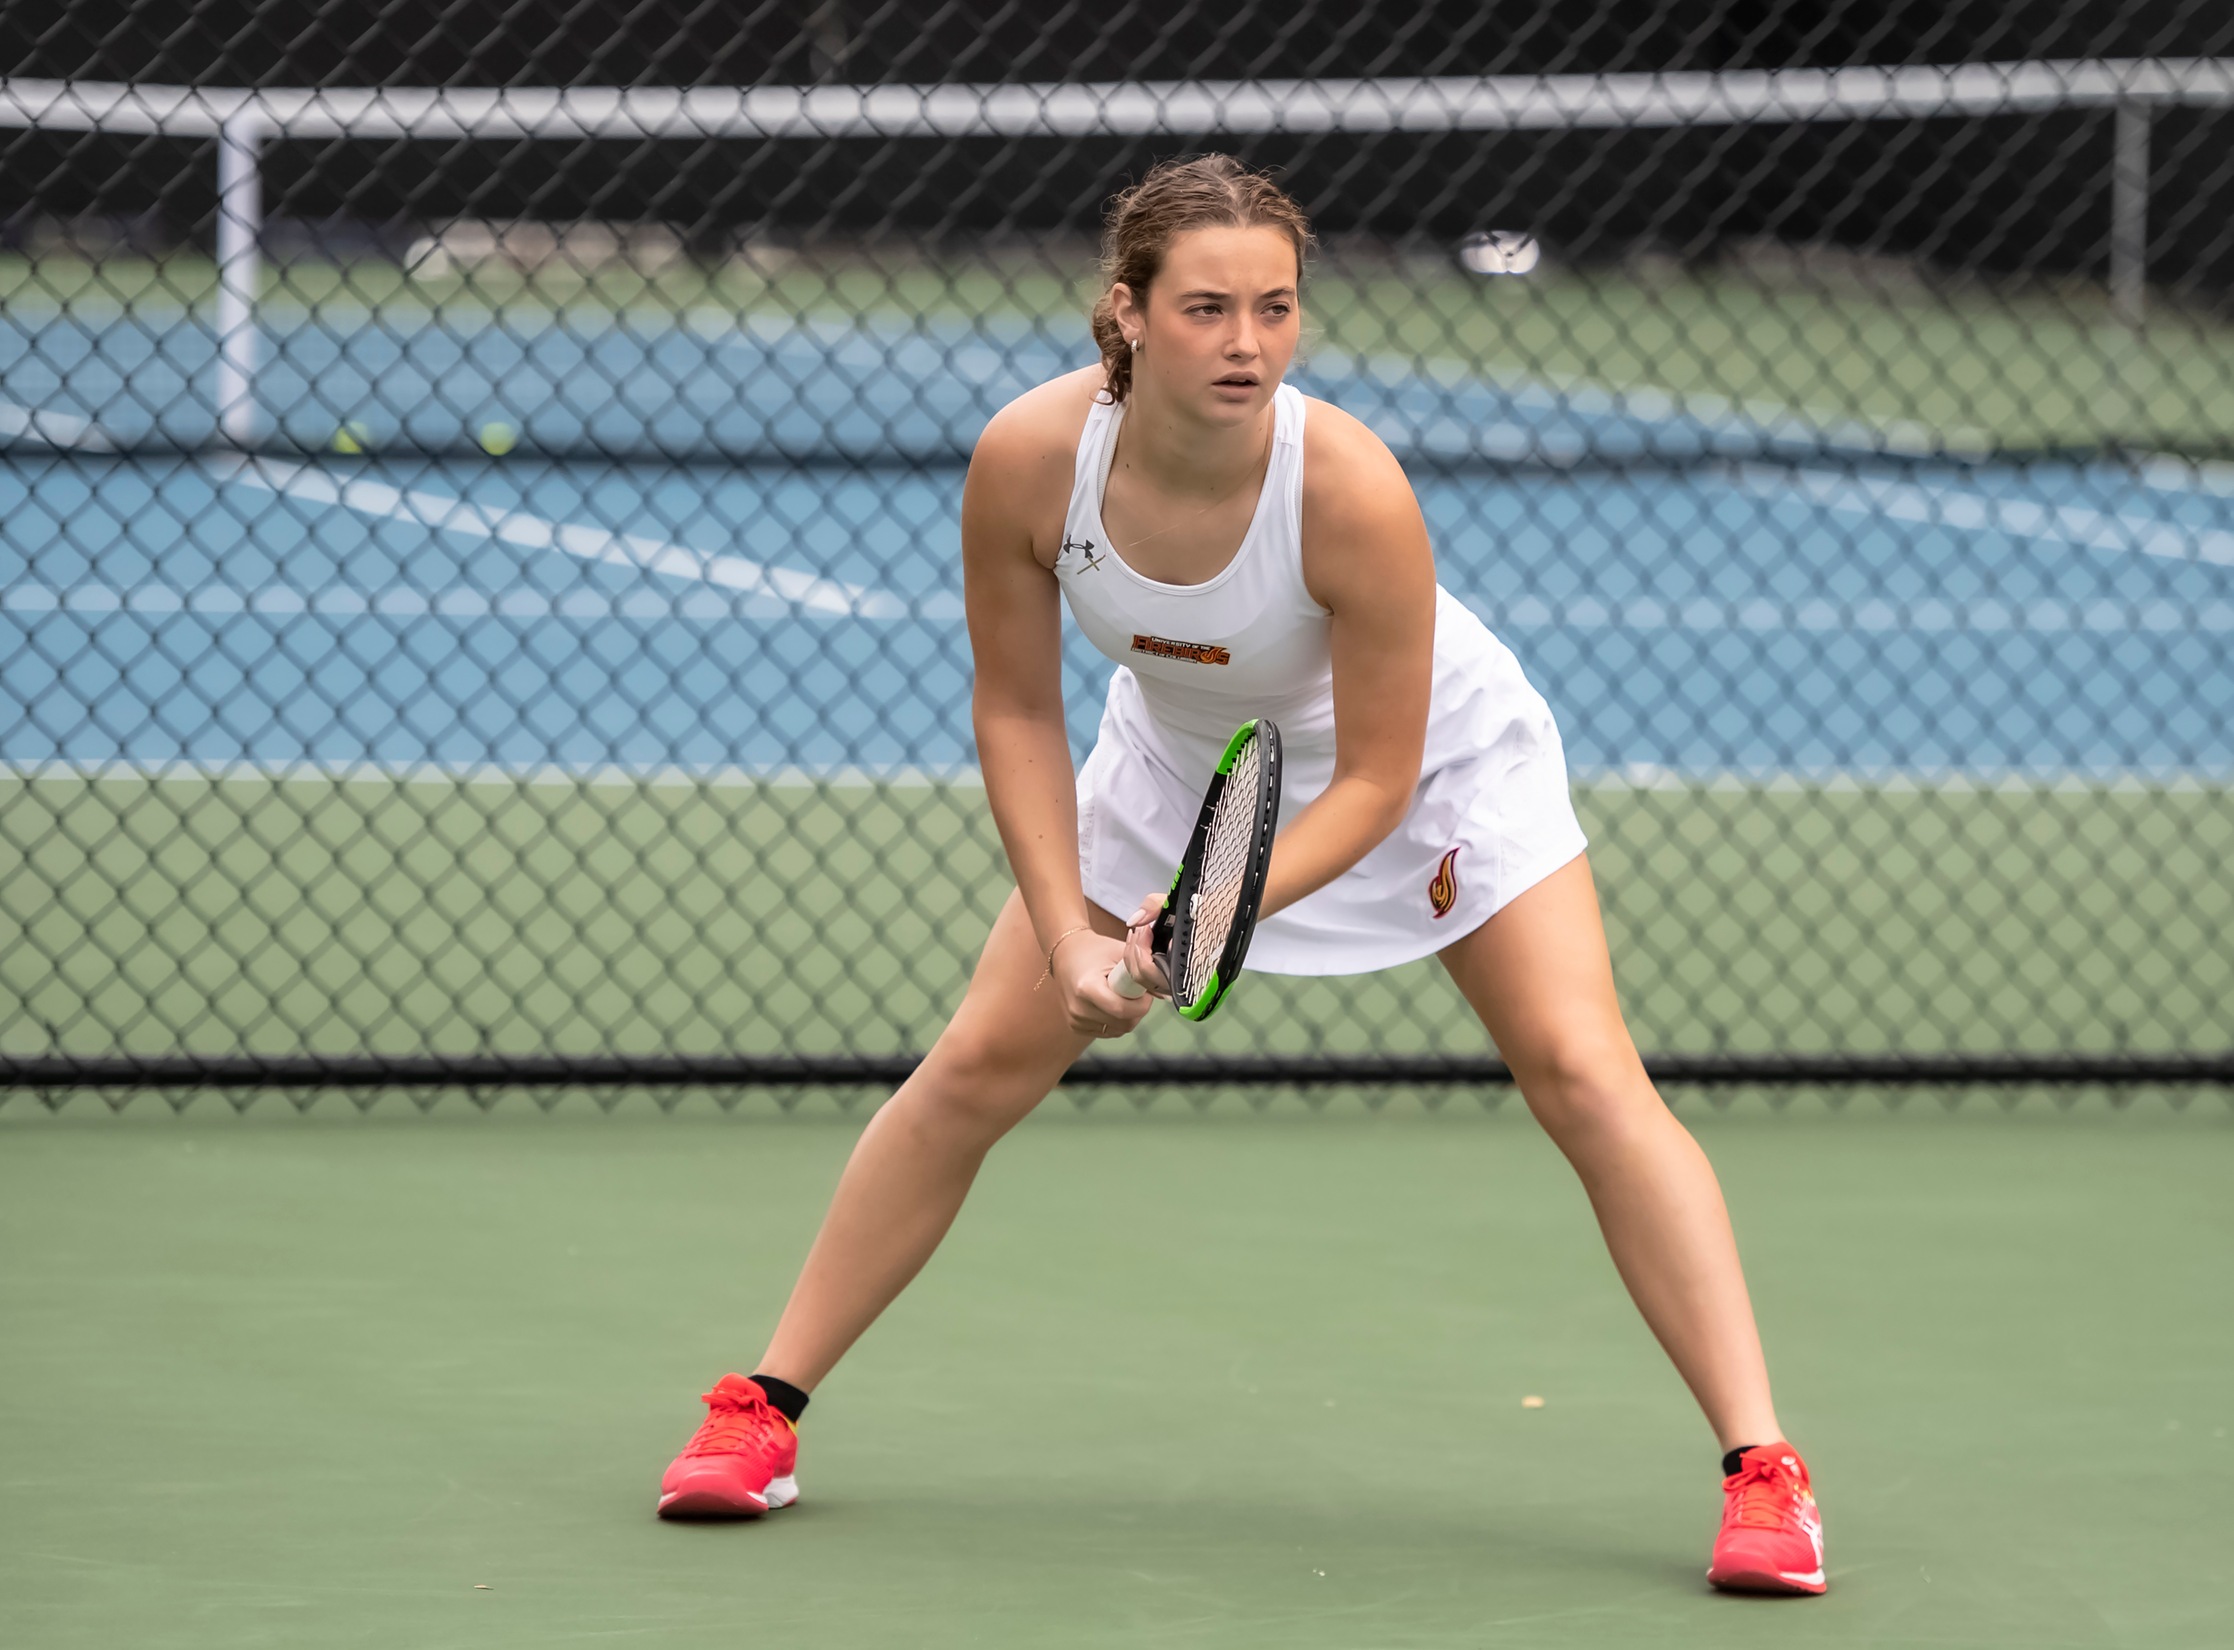 Marie had a clean sheet defeating her opponents 6-0 at No.2 doubles and 6-0, 6-0 at No.5 singles.